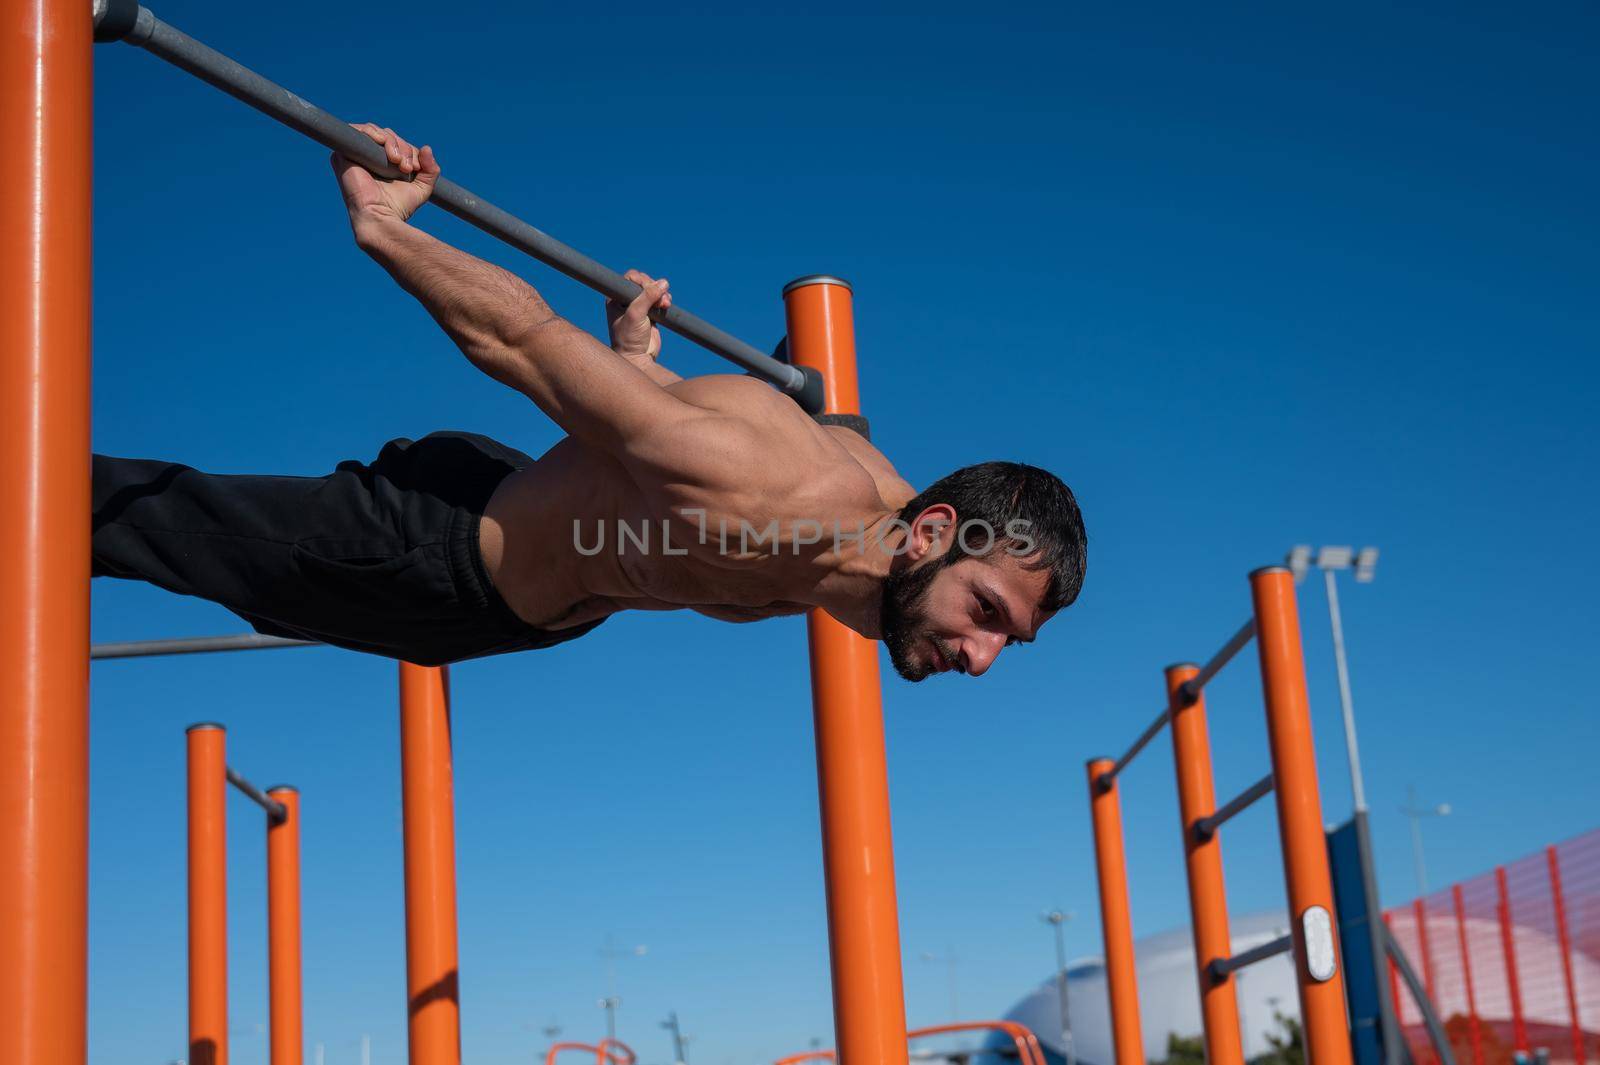 Shirtless man doing blanche on horizontal bar outdoors. by mrwed54